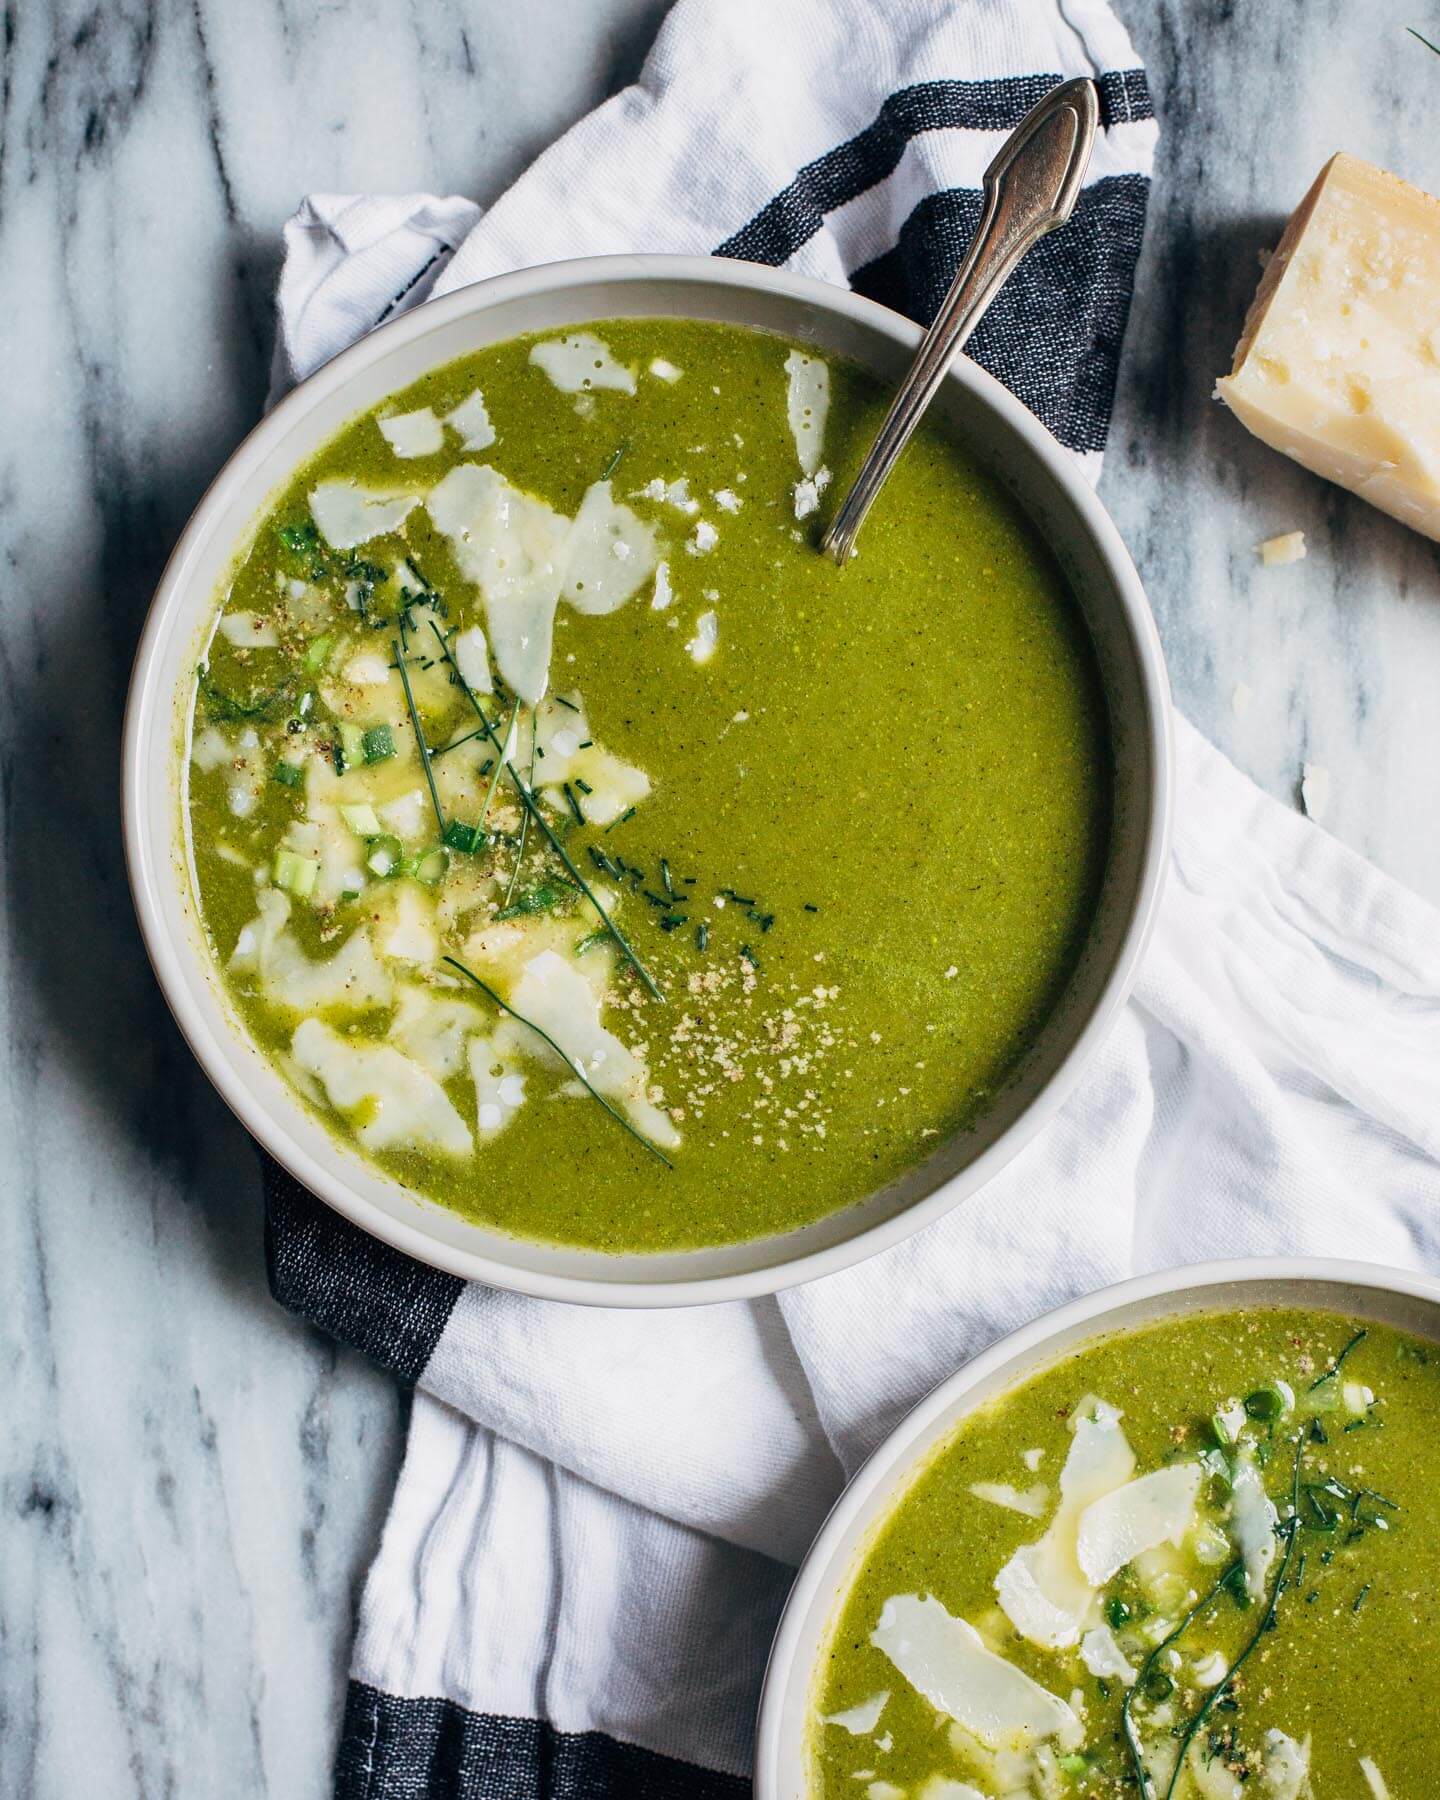 Heralding the arrival of spring produce with a vibrant green spring onion soup. This simple soup comes together quickly and captures the best flavors of early spring, from the sweet pungency of young onions to the punchy pop of tender spring greens.